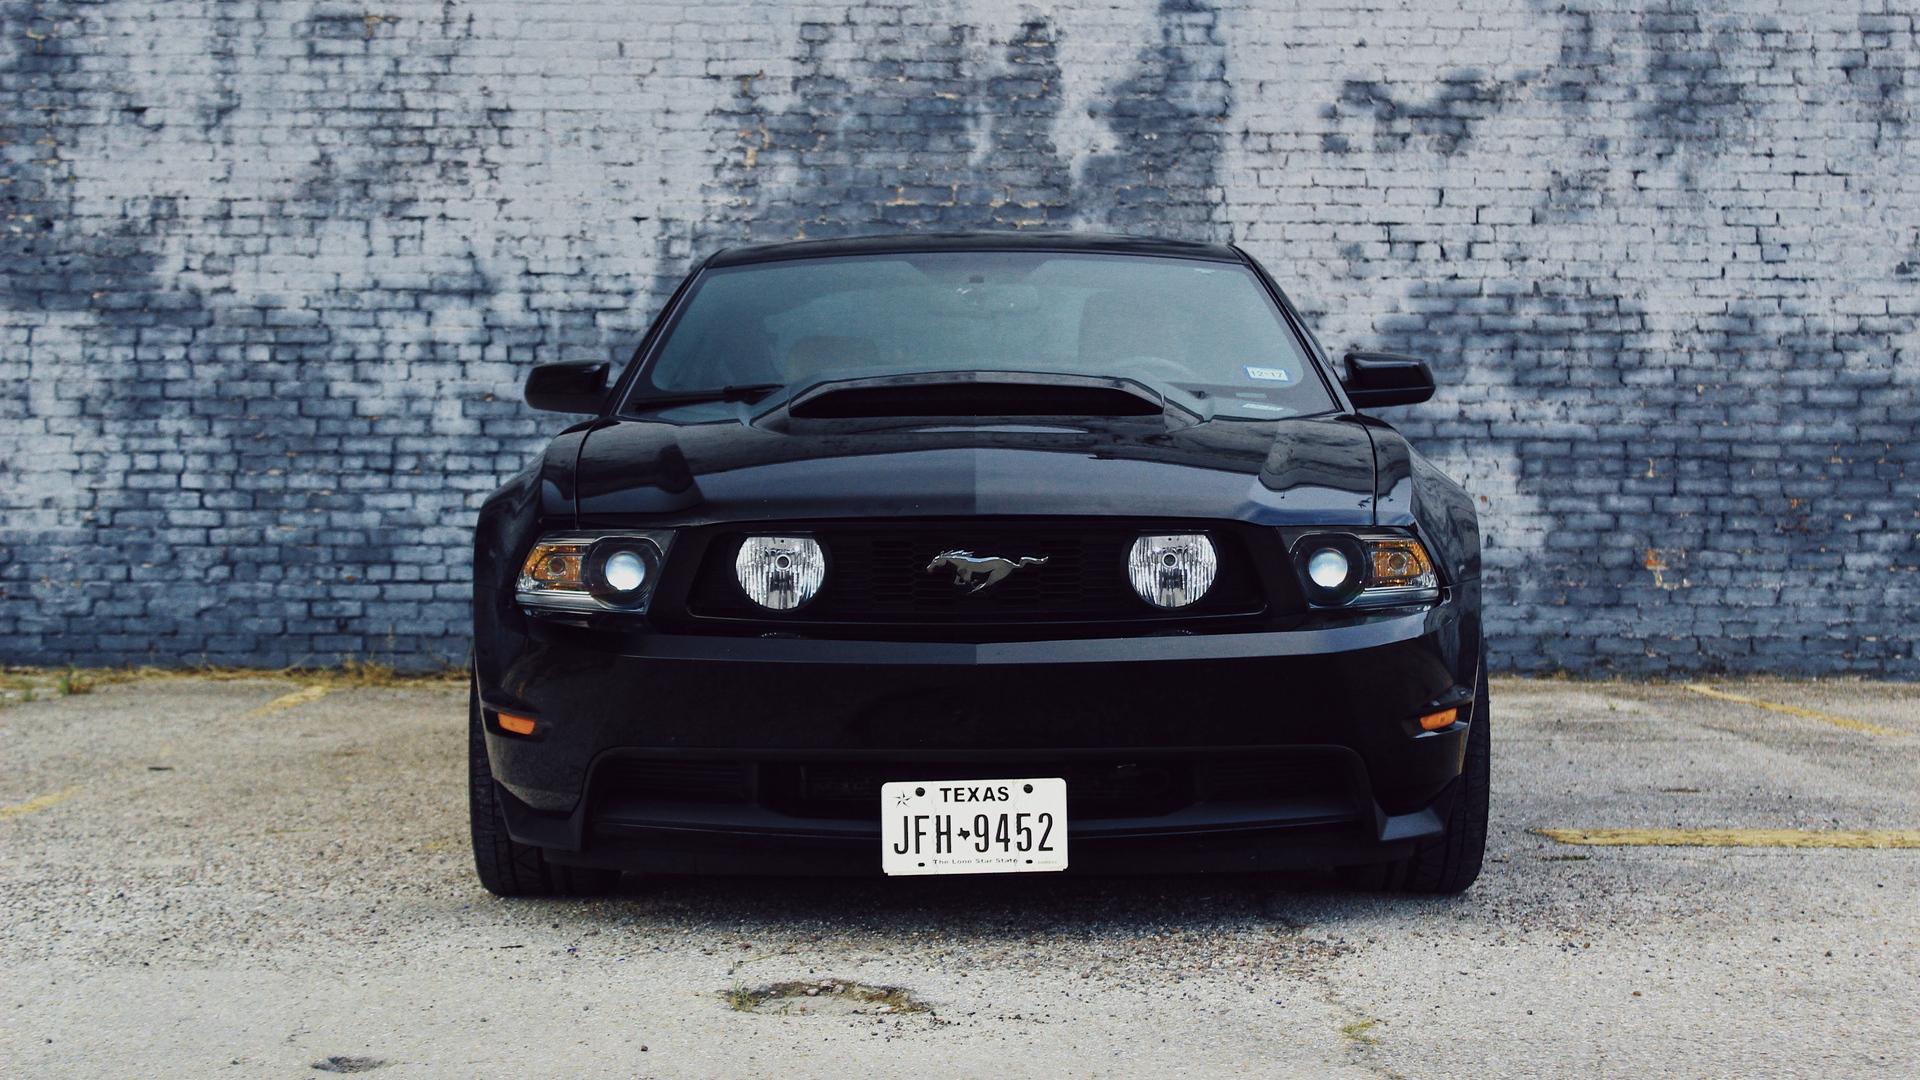 Wallpaper Ford Mustang, Car, Black, Front View - Black Mustang Wallpaper 4k - HD Wallpaper 